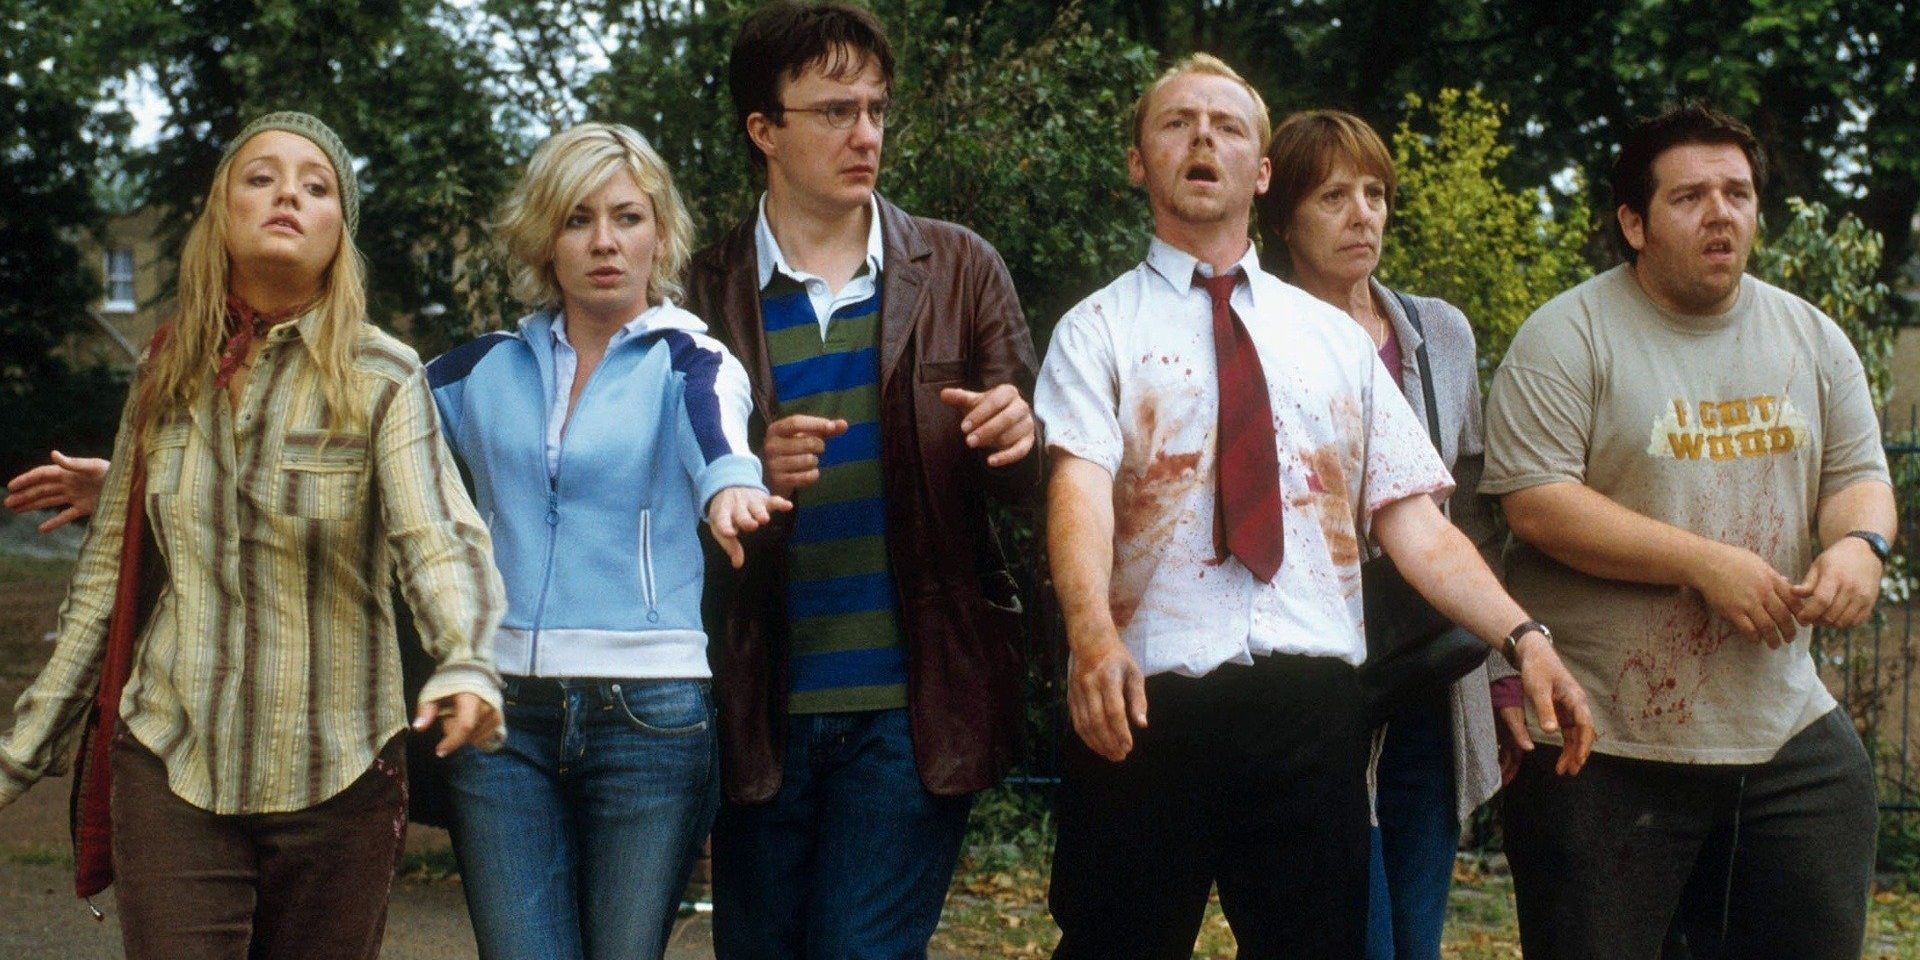 Shaun and the group pretend to be zombies in Shaun of the Dead